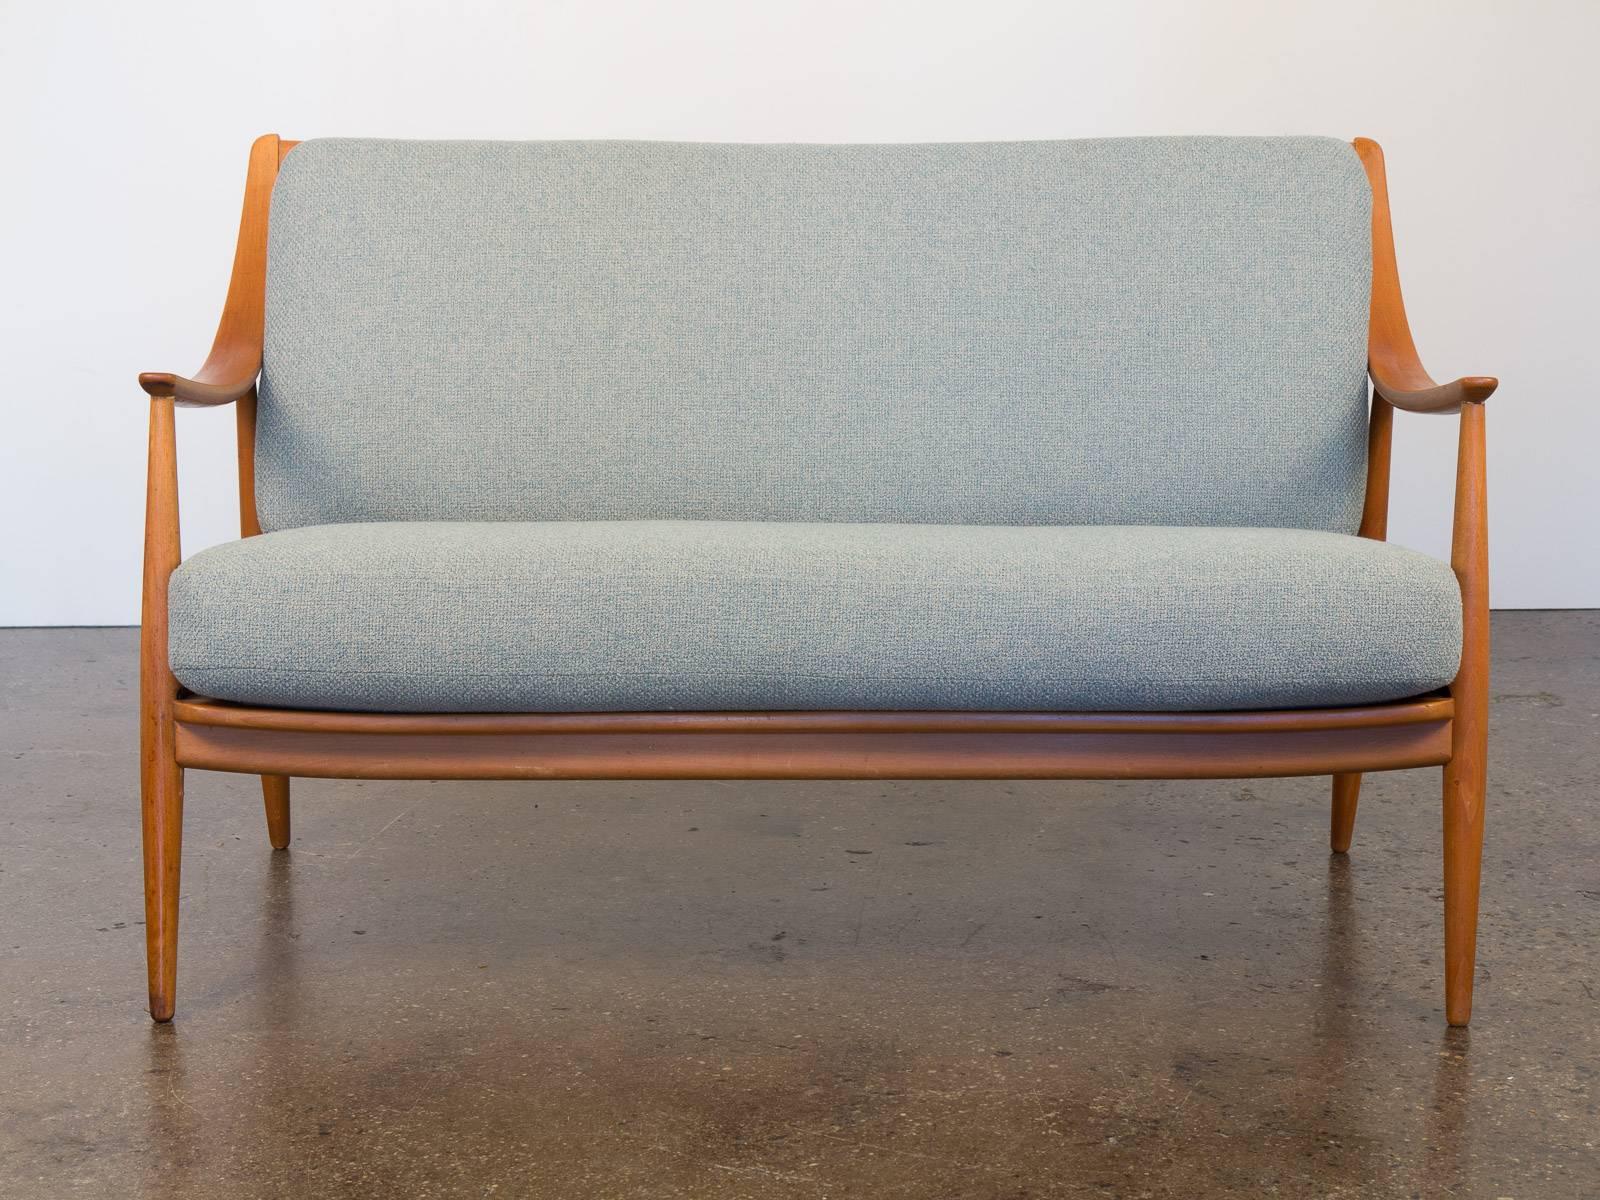 A graceful loveseat designed by Peter Hvidt and Orla Mølgaard Nielsen for France and Son. This sofa boasts sculpturally swooping armrests in a birch patina with a view that continues to the spindle backing. Newly upholstered in a soft robin's egg